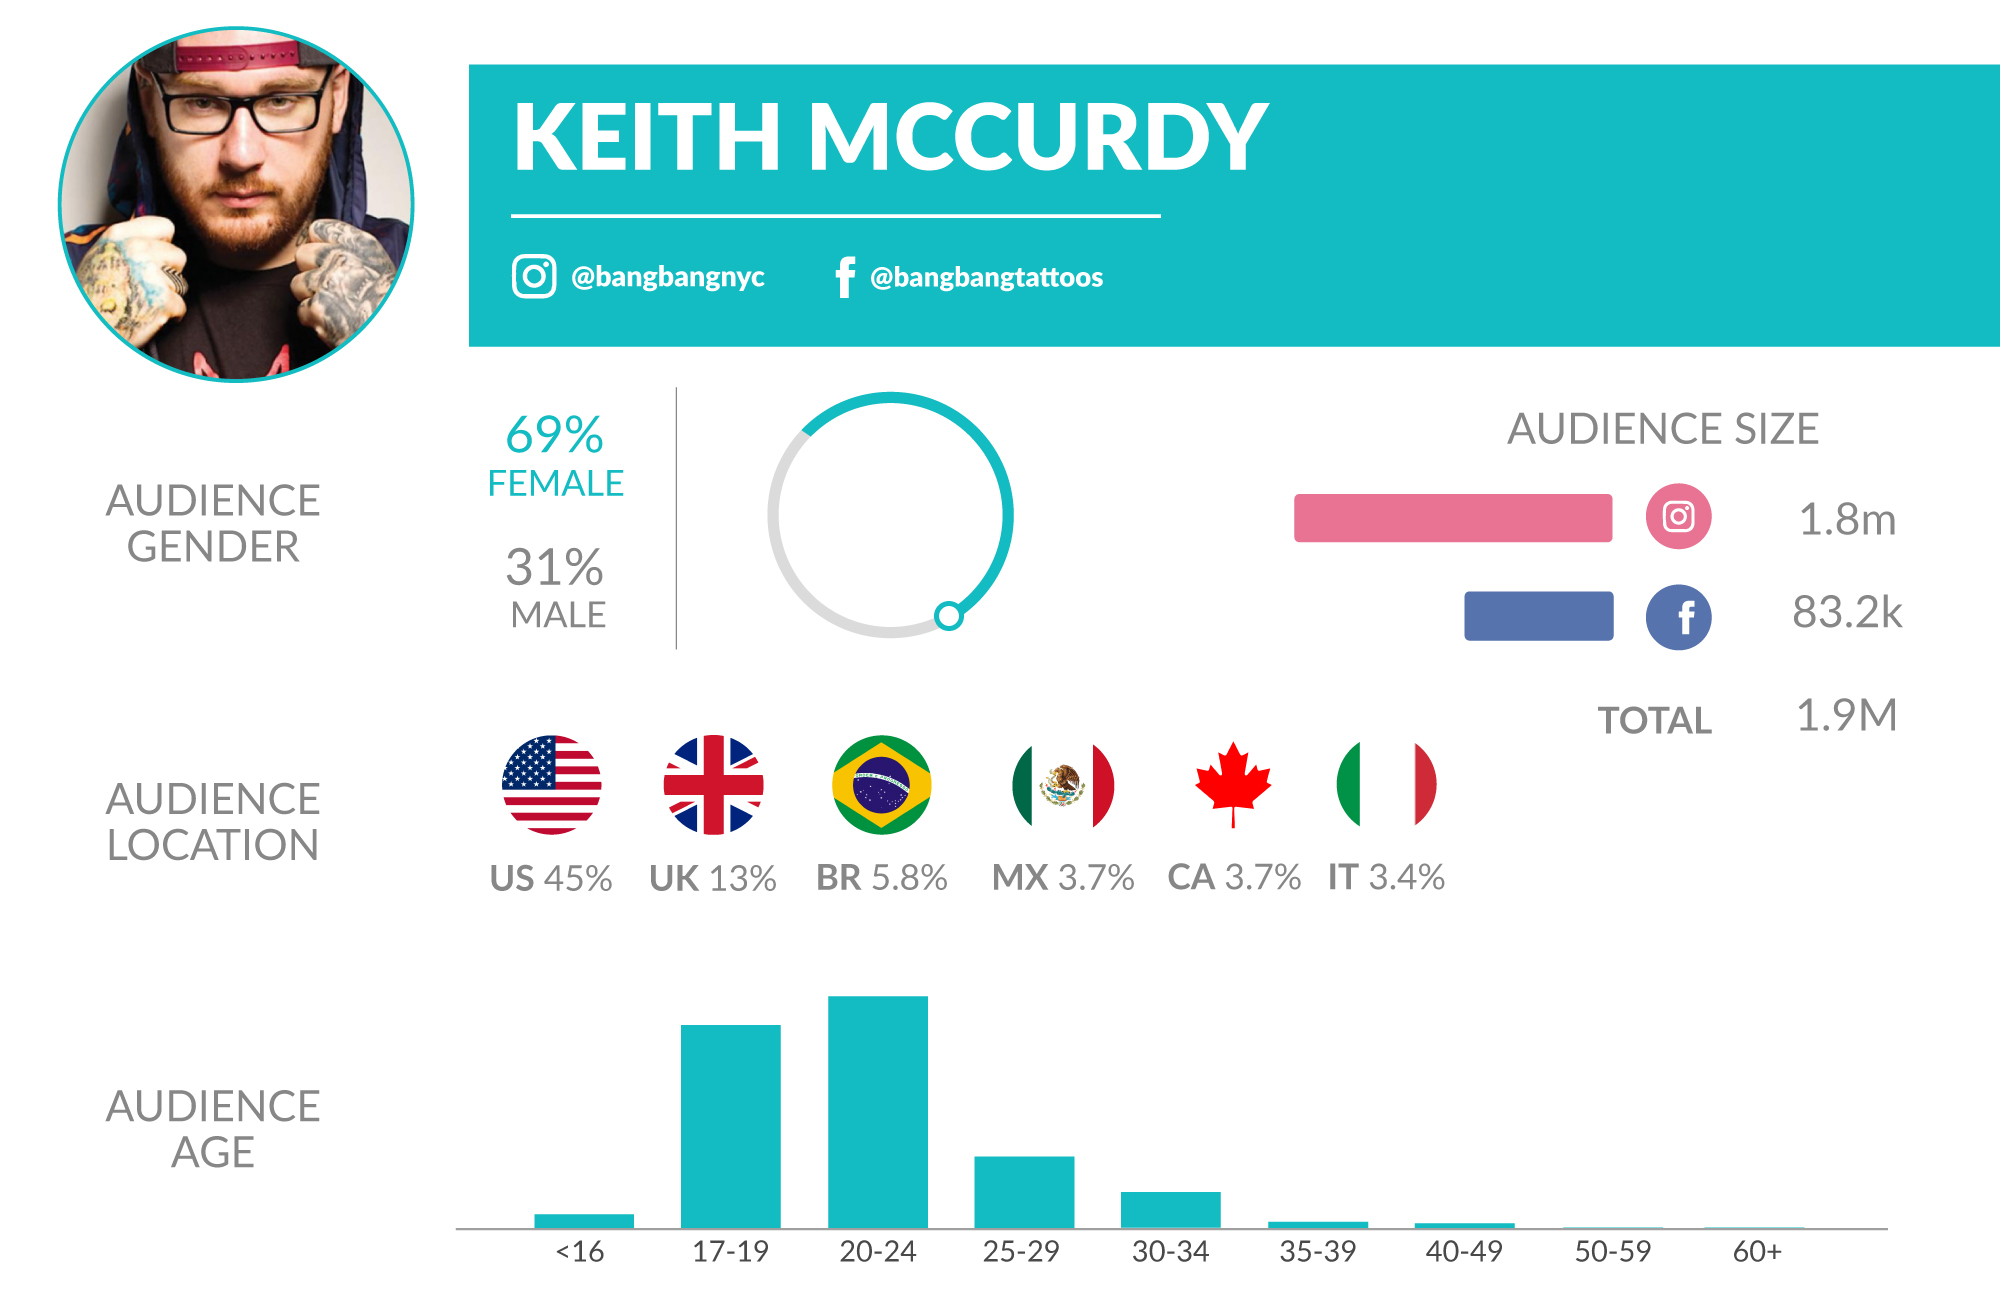 keith mccurdy is amazing at what he does and has worked with various!    celebrities such as rihanna miley cyrus justin bieber kylie jenner - 20 most followed celebrities on instagram in 2017